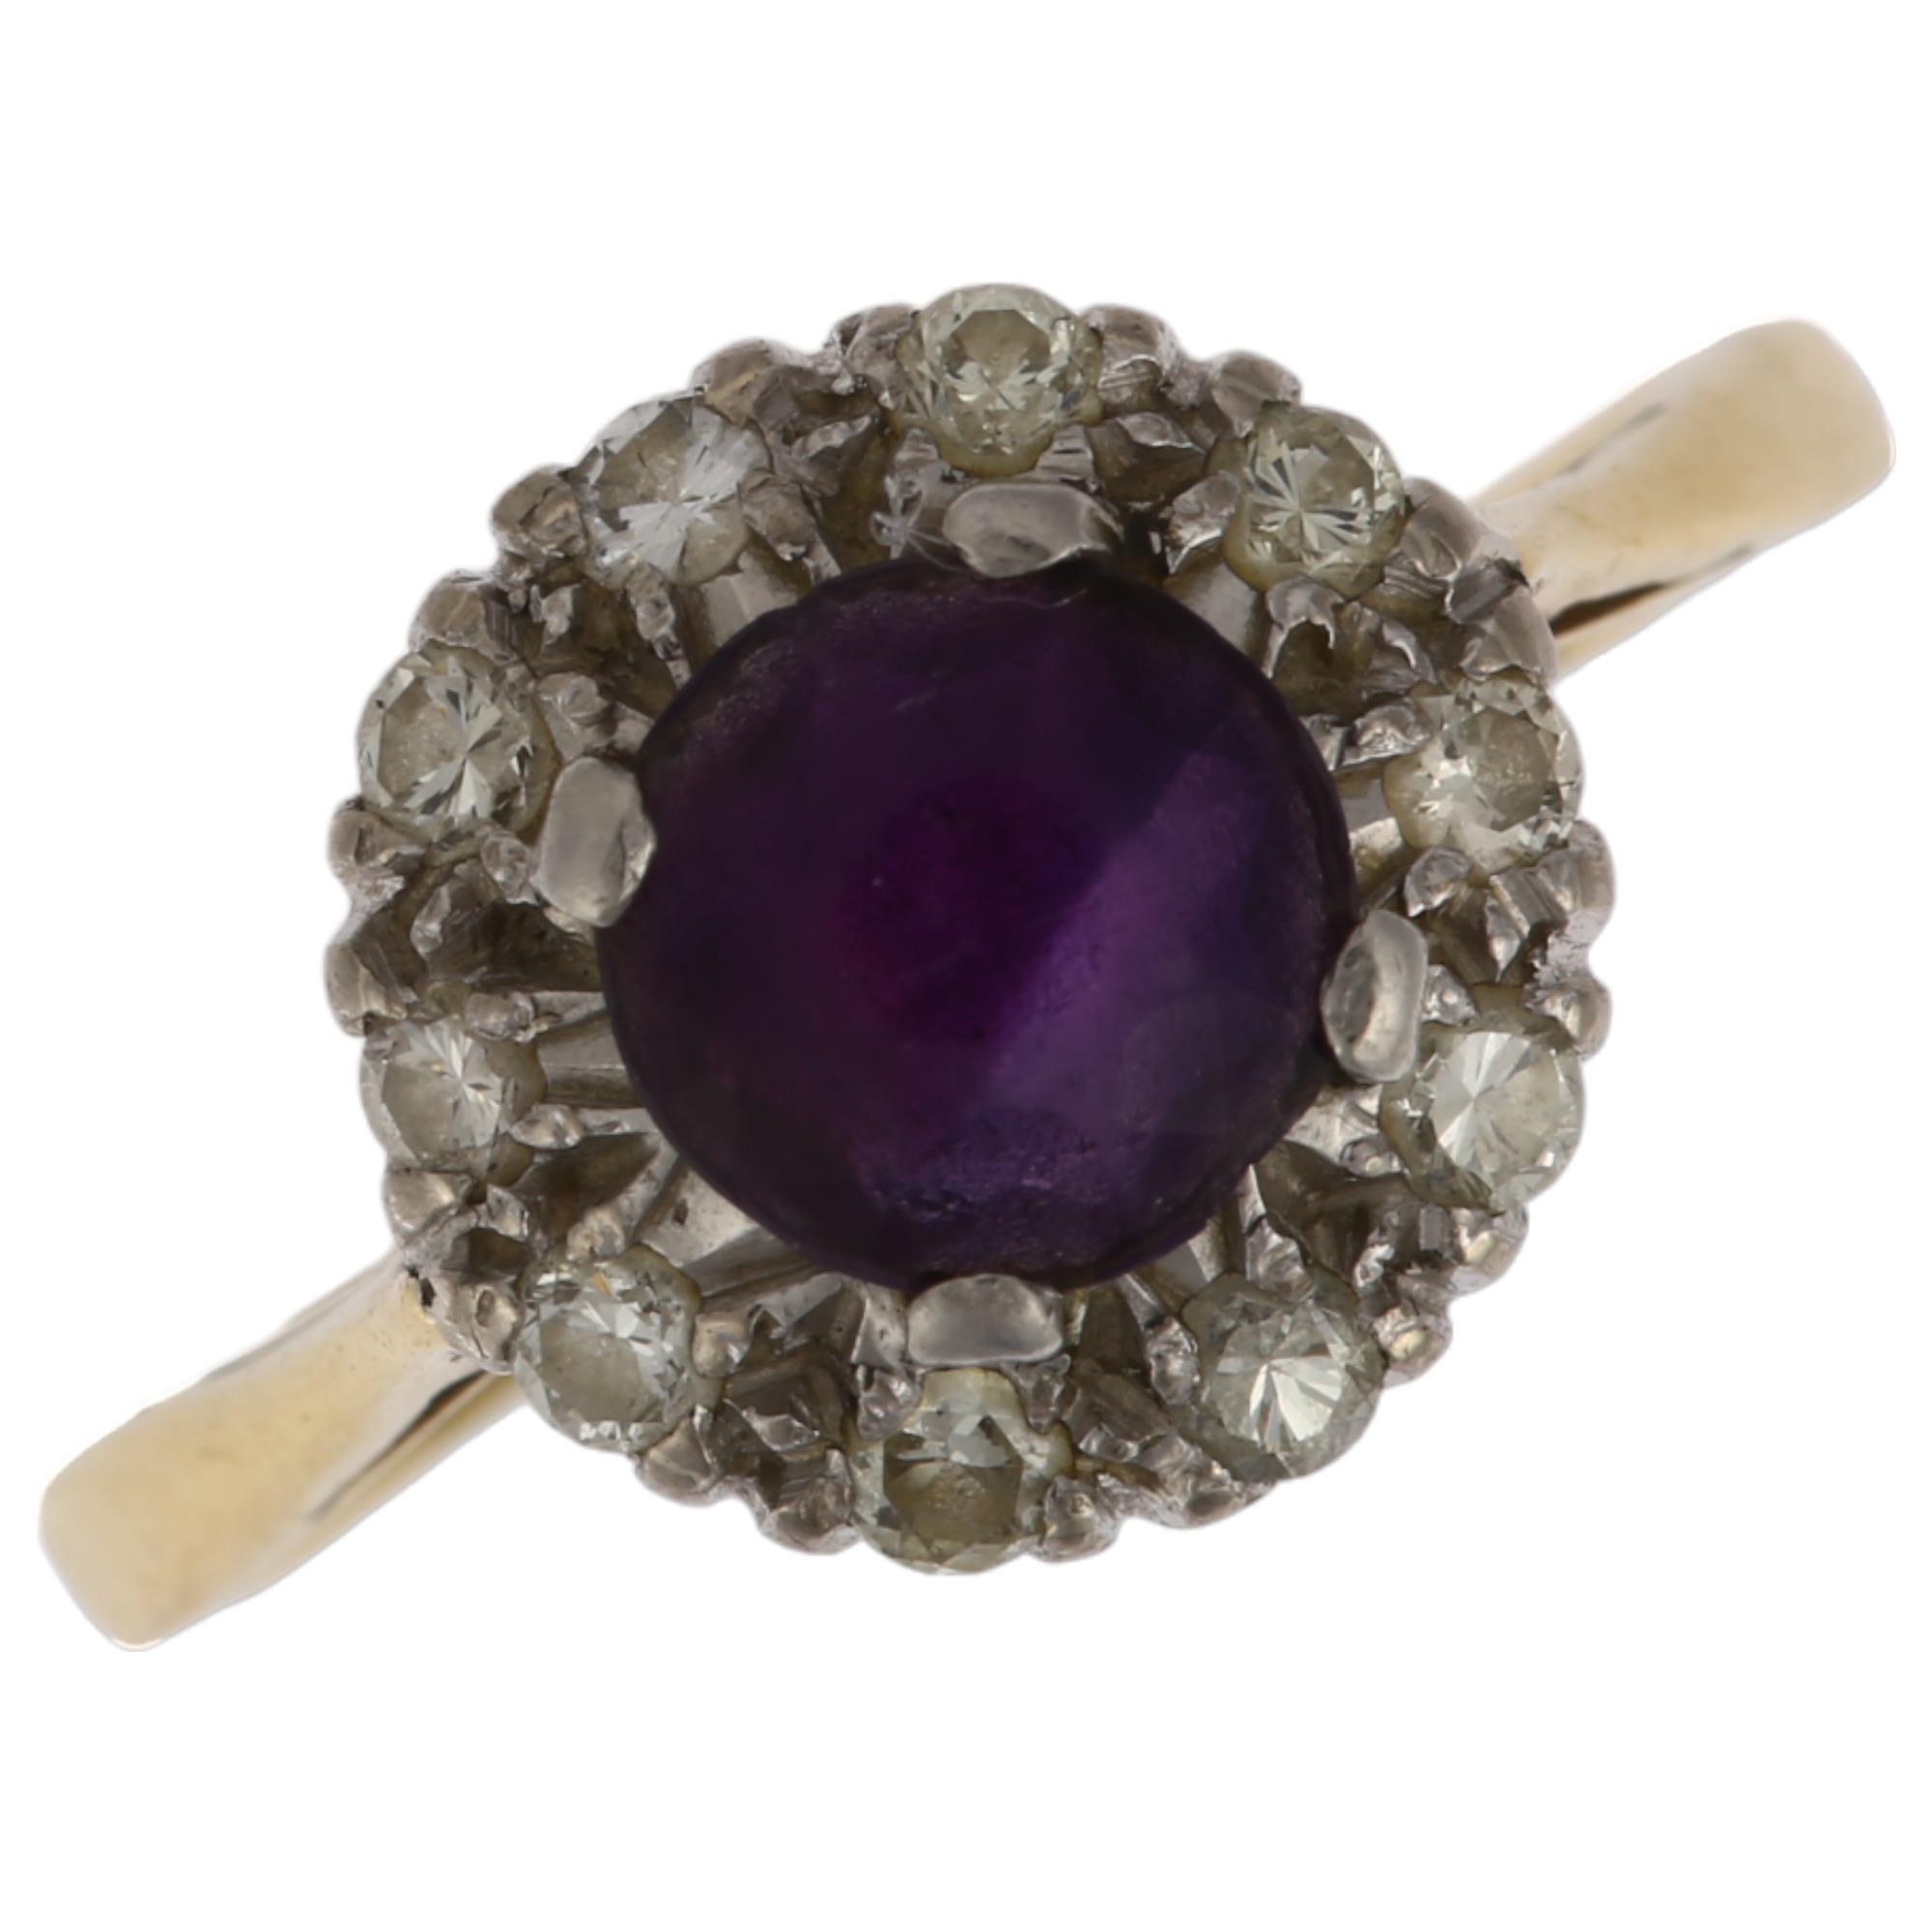 A mid-20th century 18ct gold amethyst and diamond circular cluster ring, platinum-topped, claw set